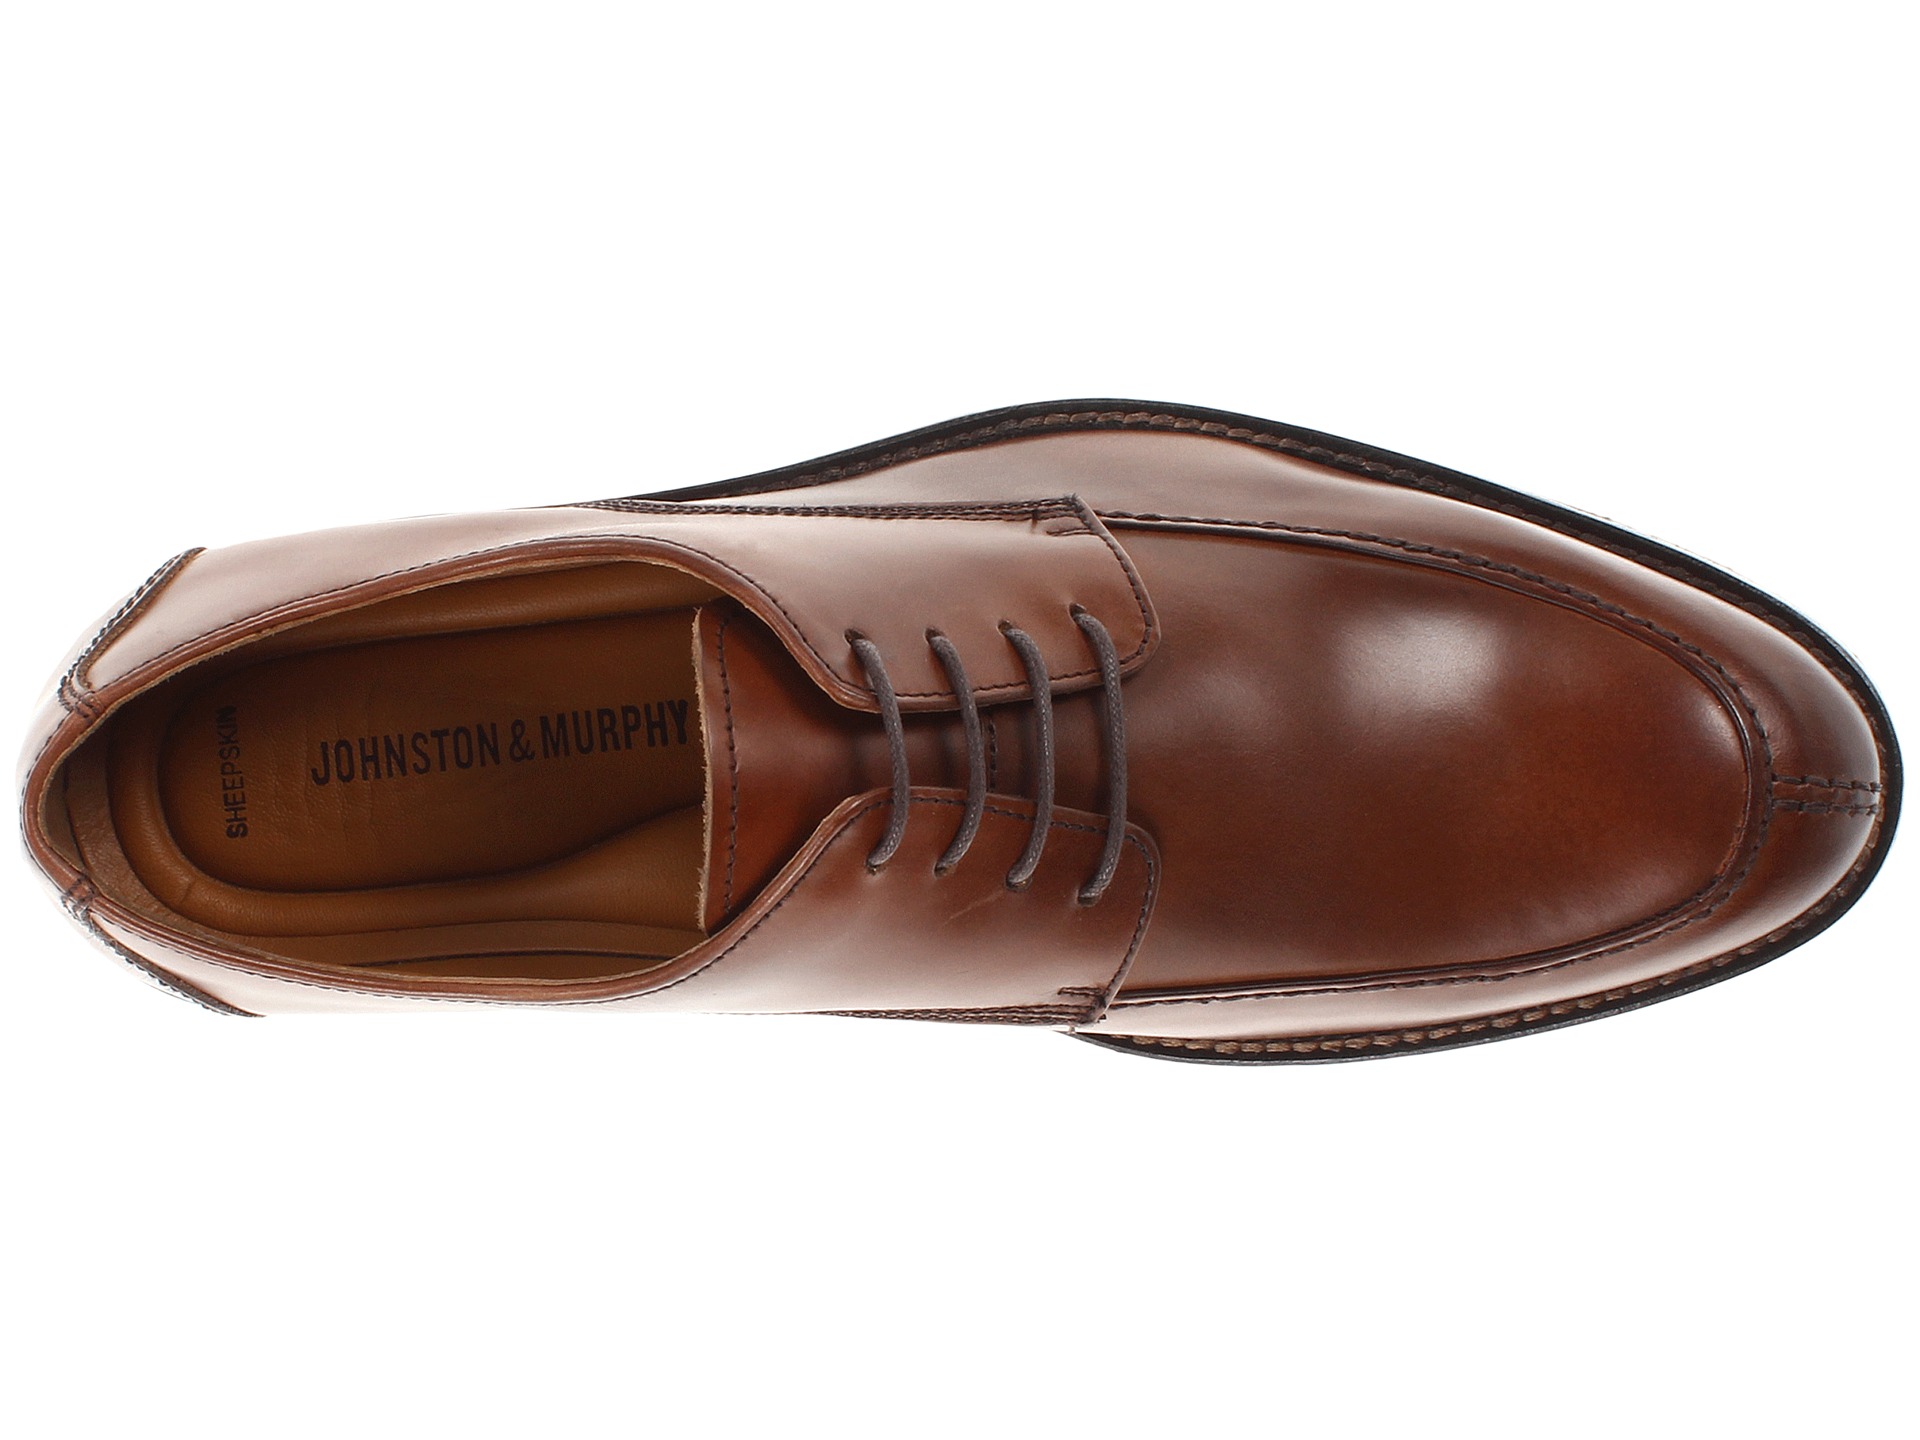 Johnston Murphy Hartley Y Moc Lace Up | Shipped Free at Zappos